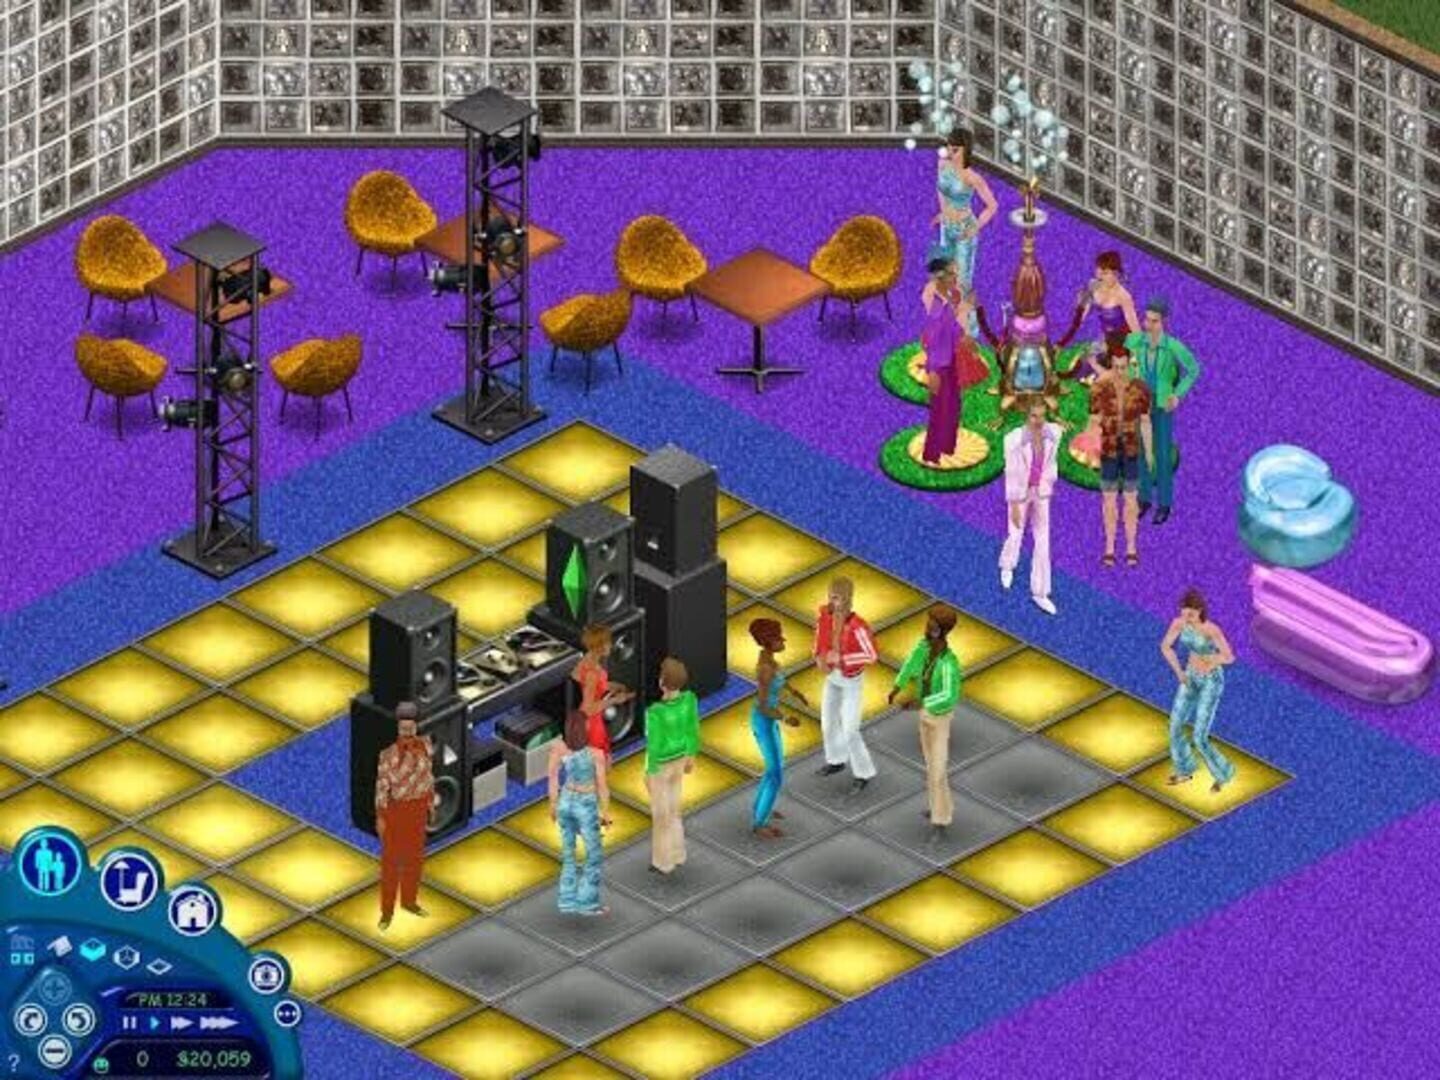 Sims 1 русский. SIMS 1 House Party. The SIMS: House Party. Симс 2 Хаус пати. Симс 1 вечеринка.